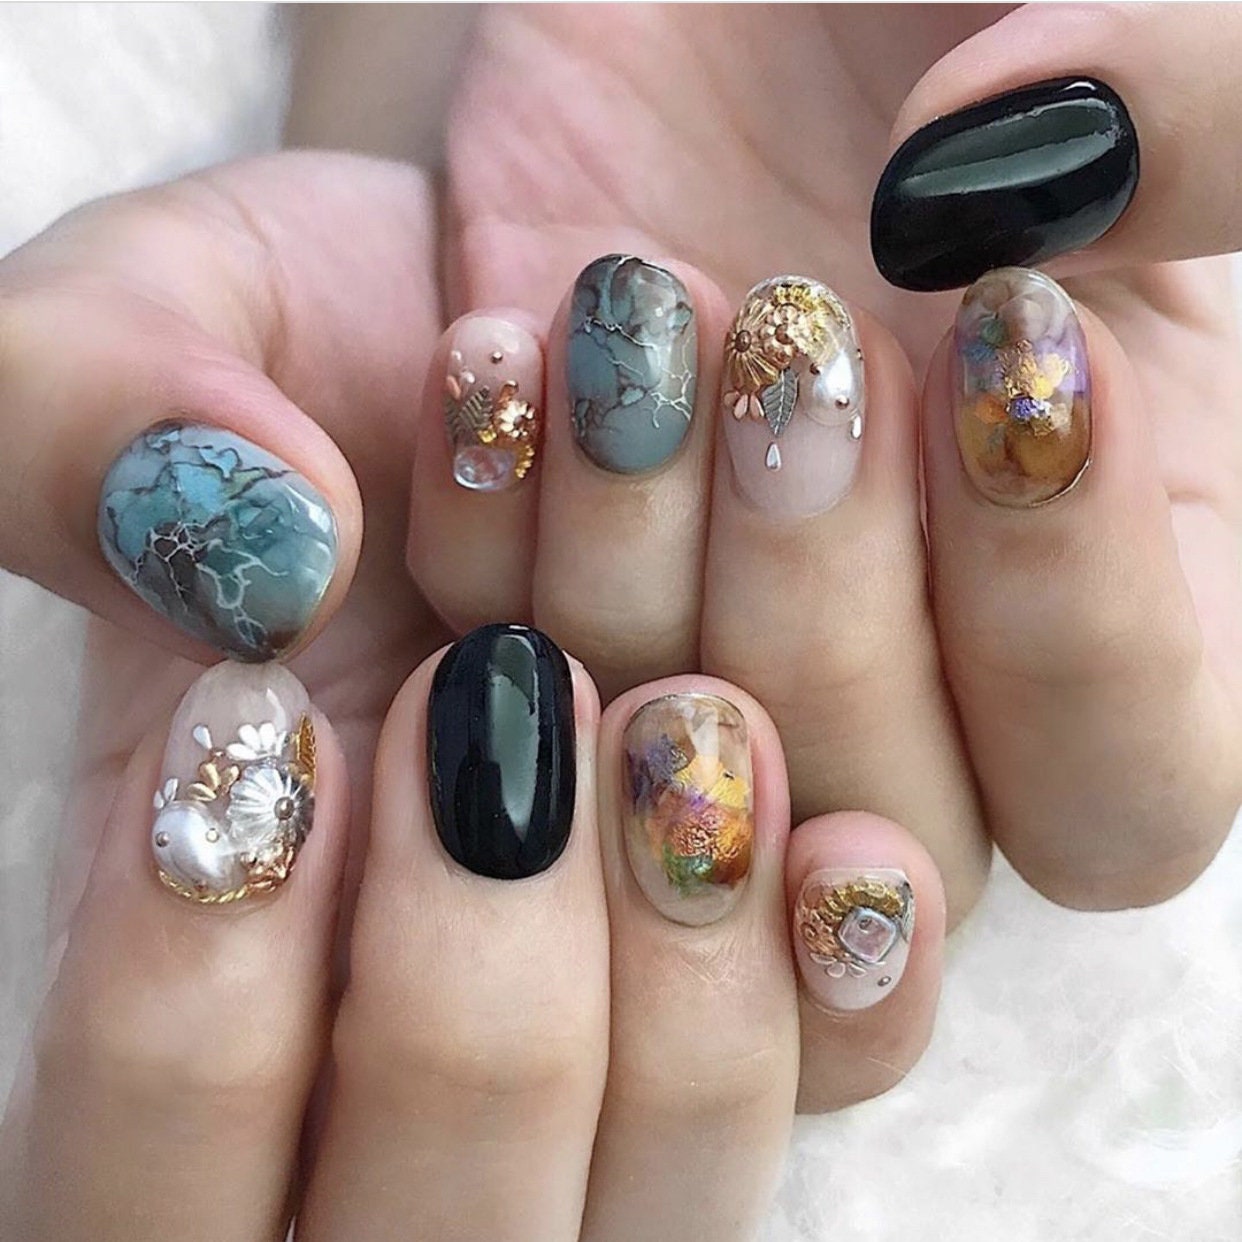 8 Christmas Nail Art Designs To Get You In The Festive Spirit | Tatler Asia